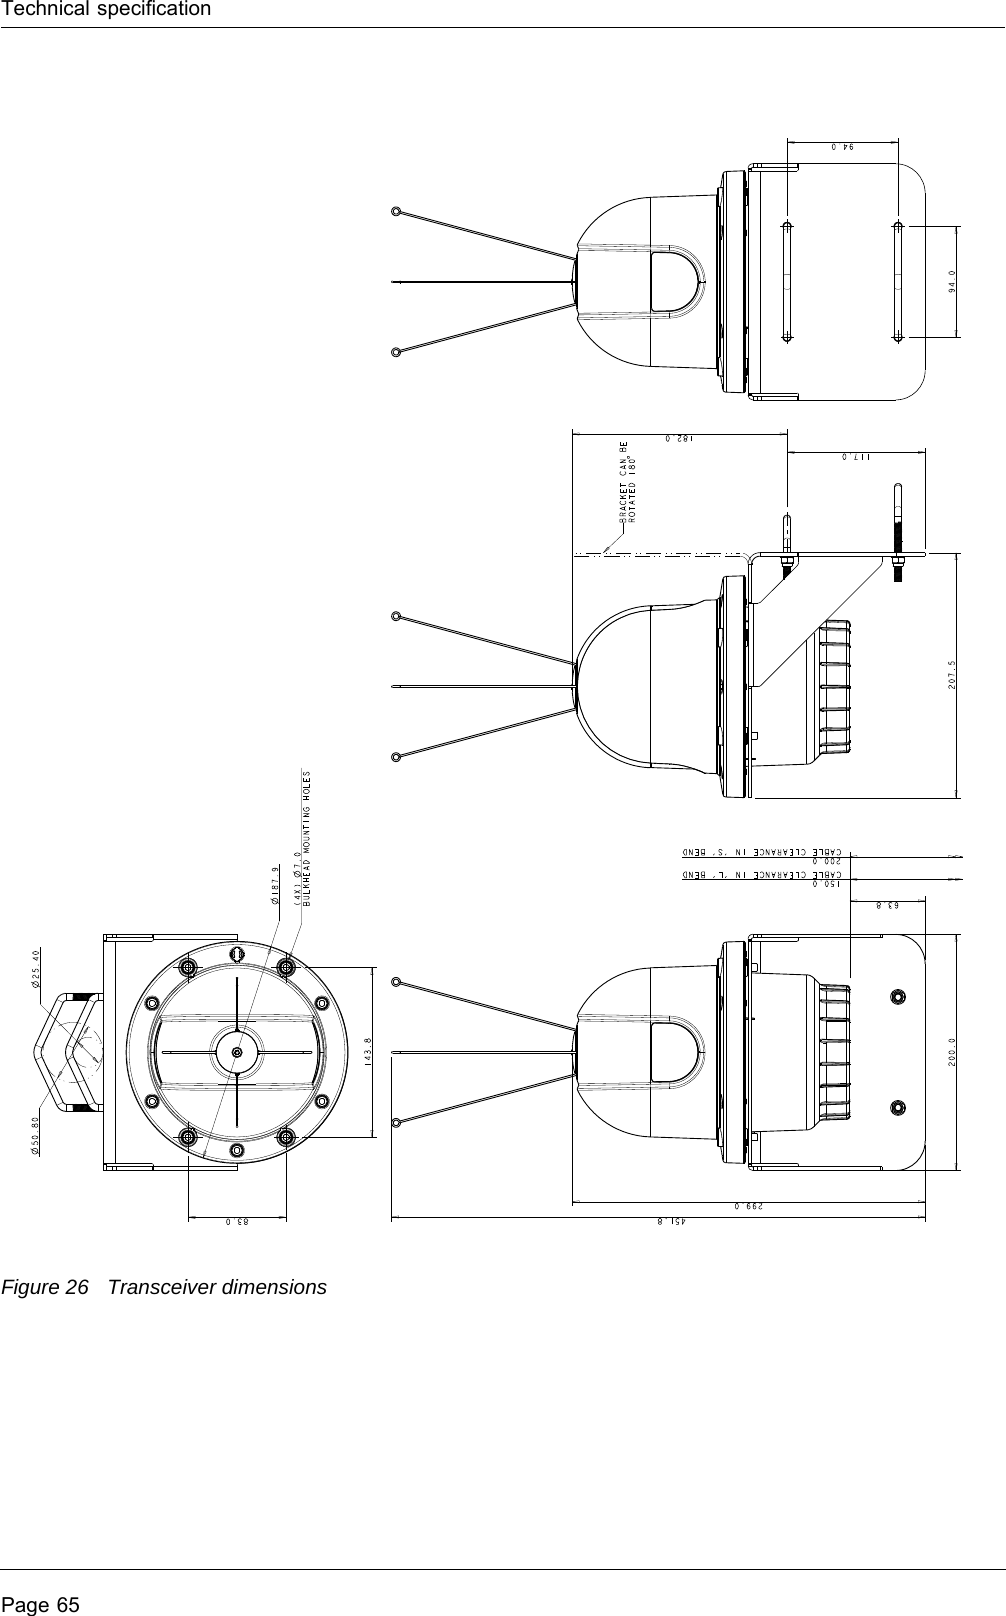 Technical specificationPage 65Figure 26 Transceiver dimensions